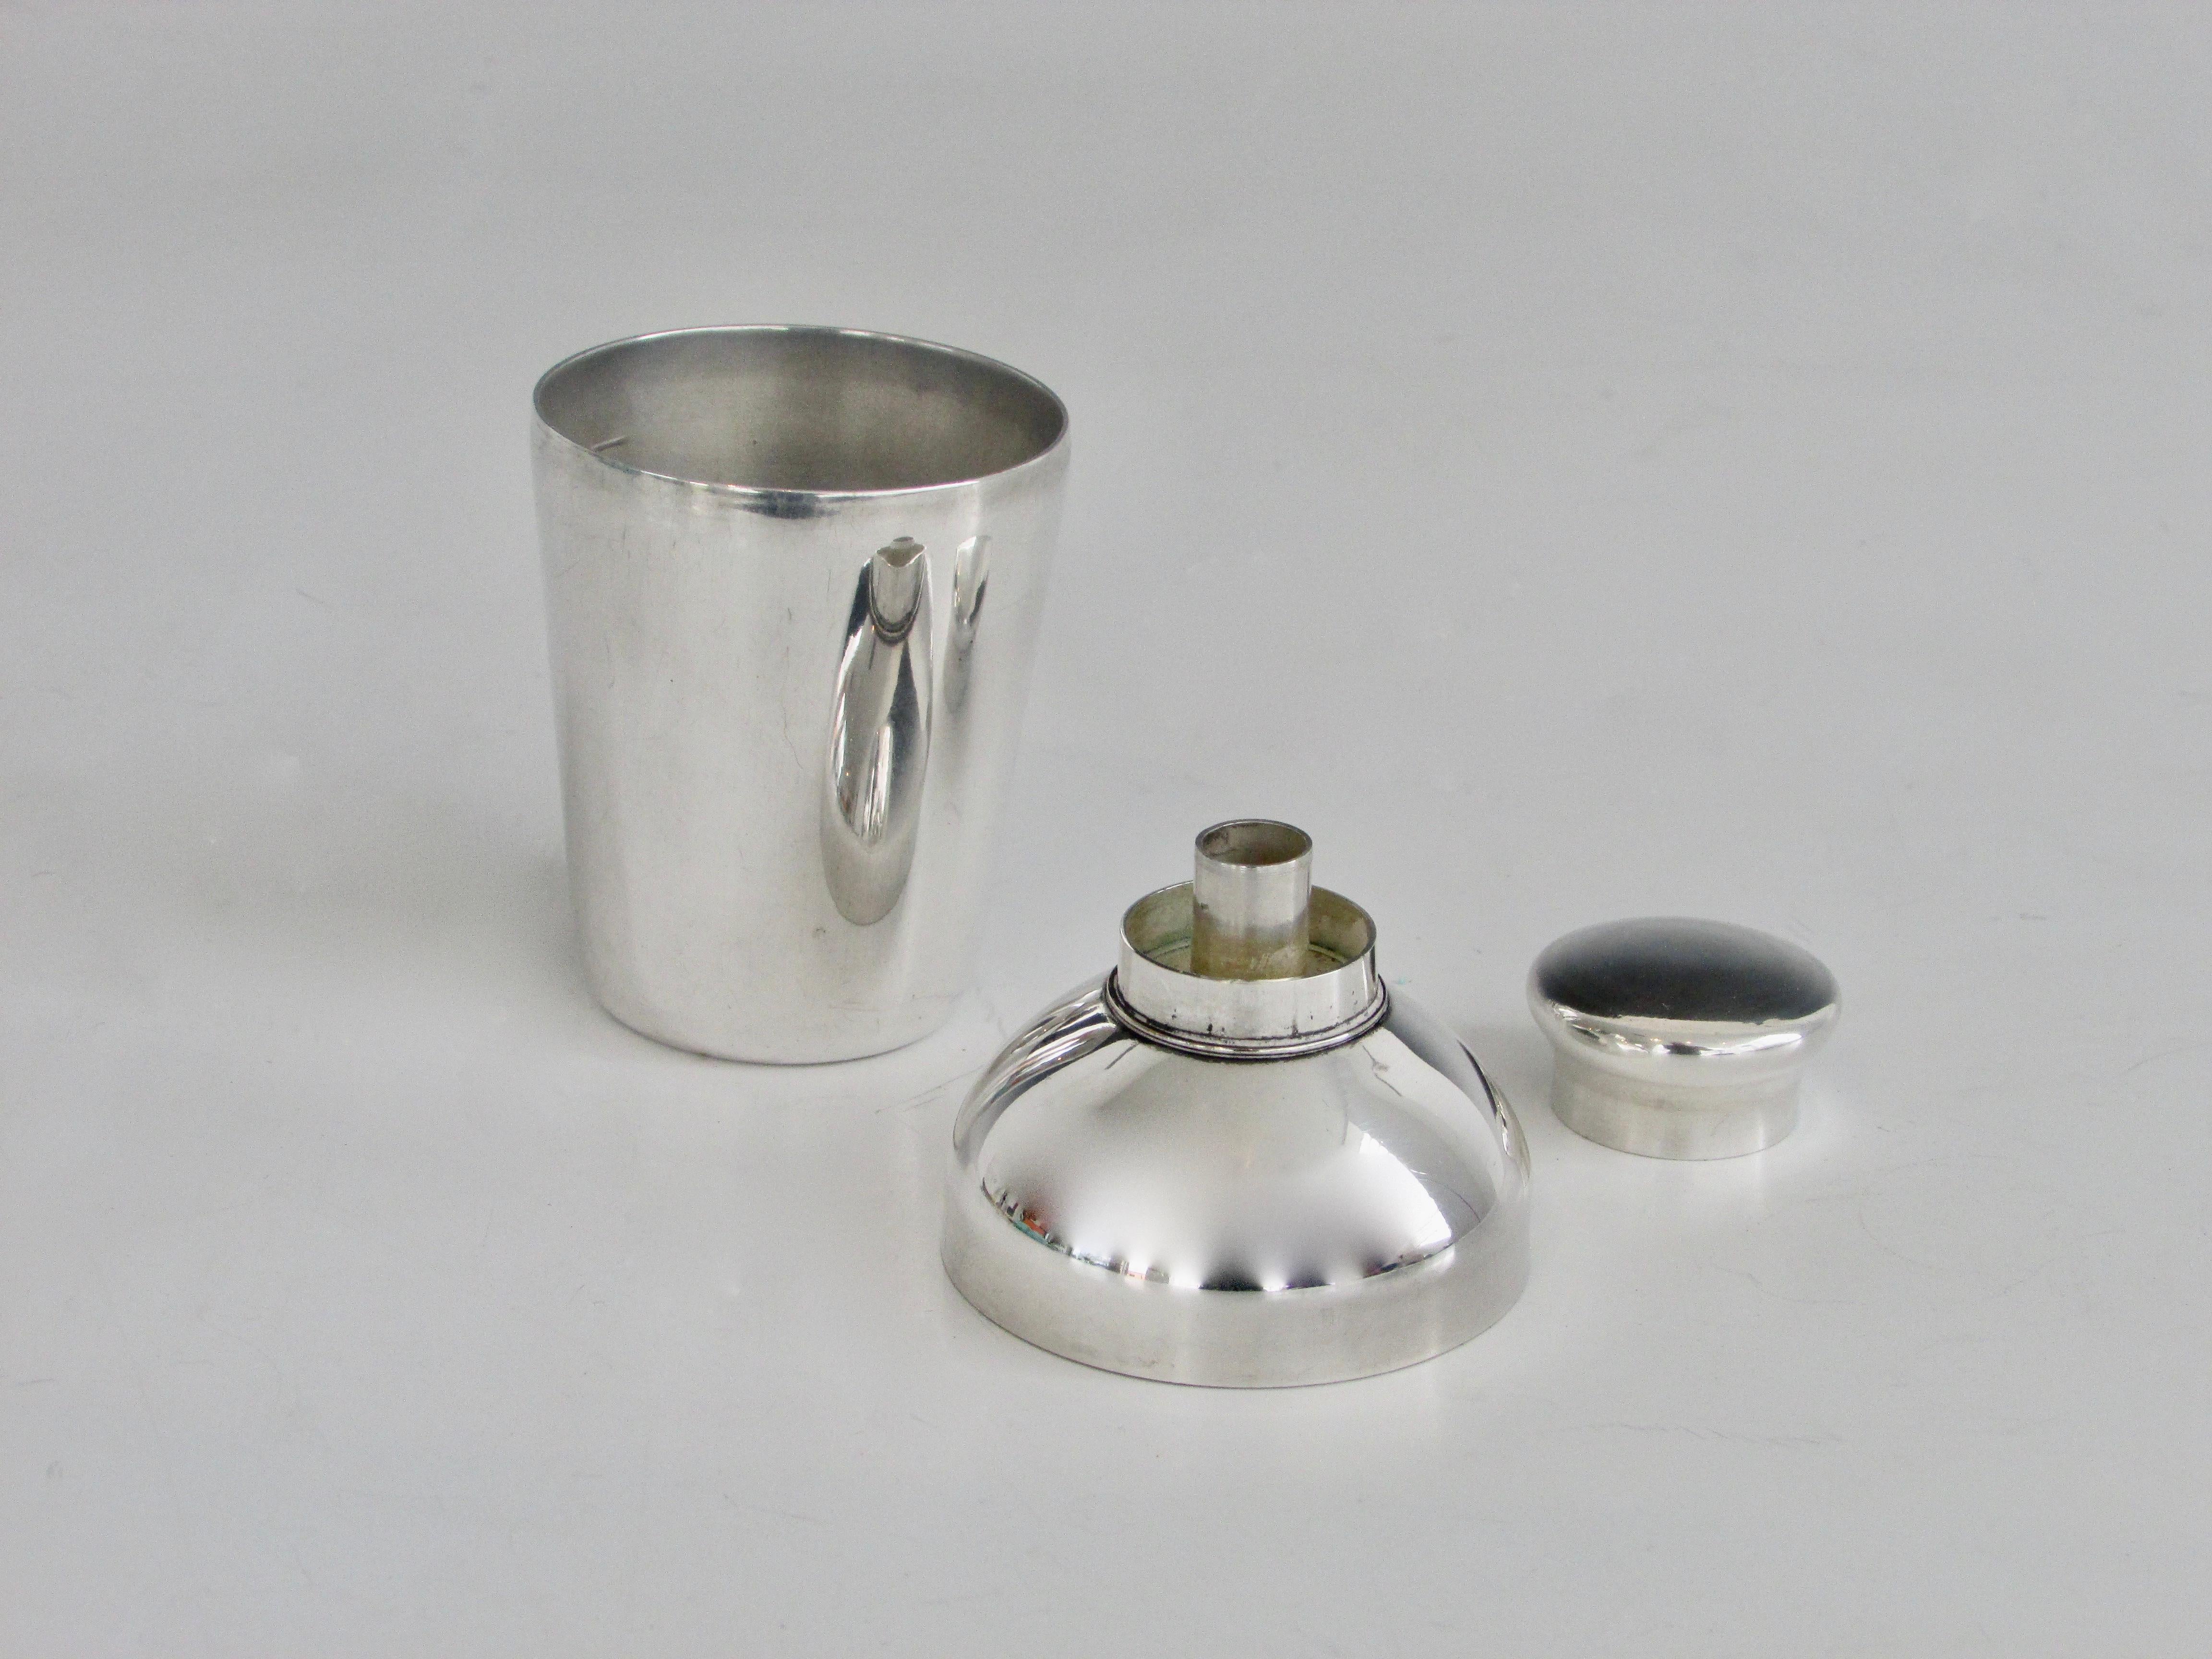 American Mini Silver Plate Art Deco Shot Glass Size Jigger Cocktail Shaker by Napier For Sale